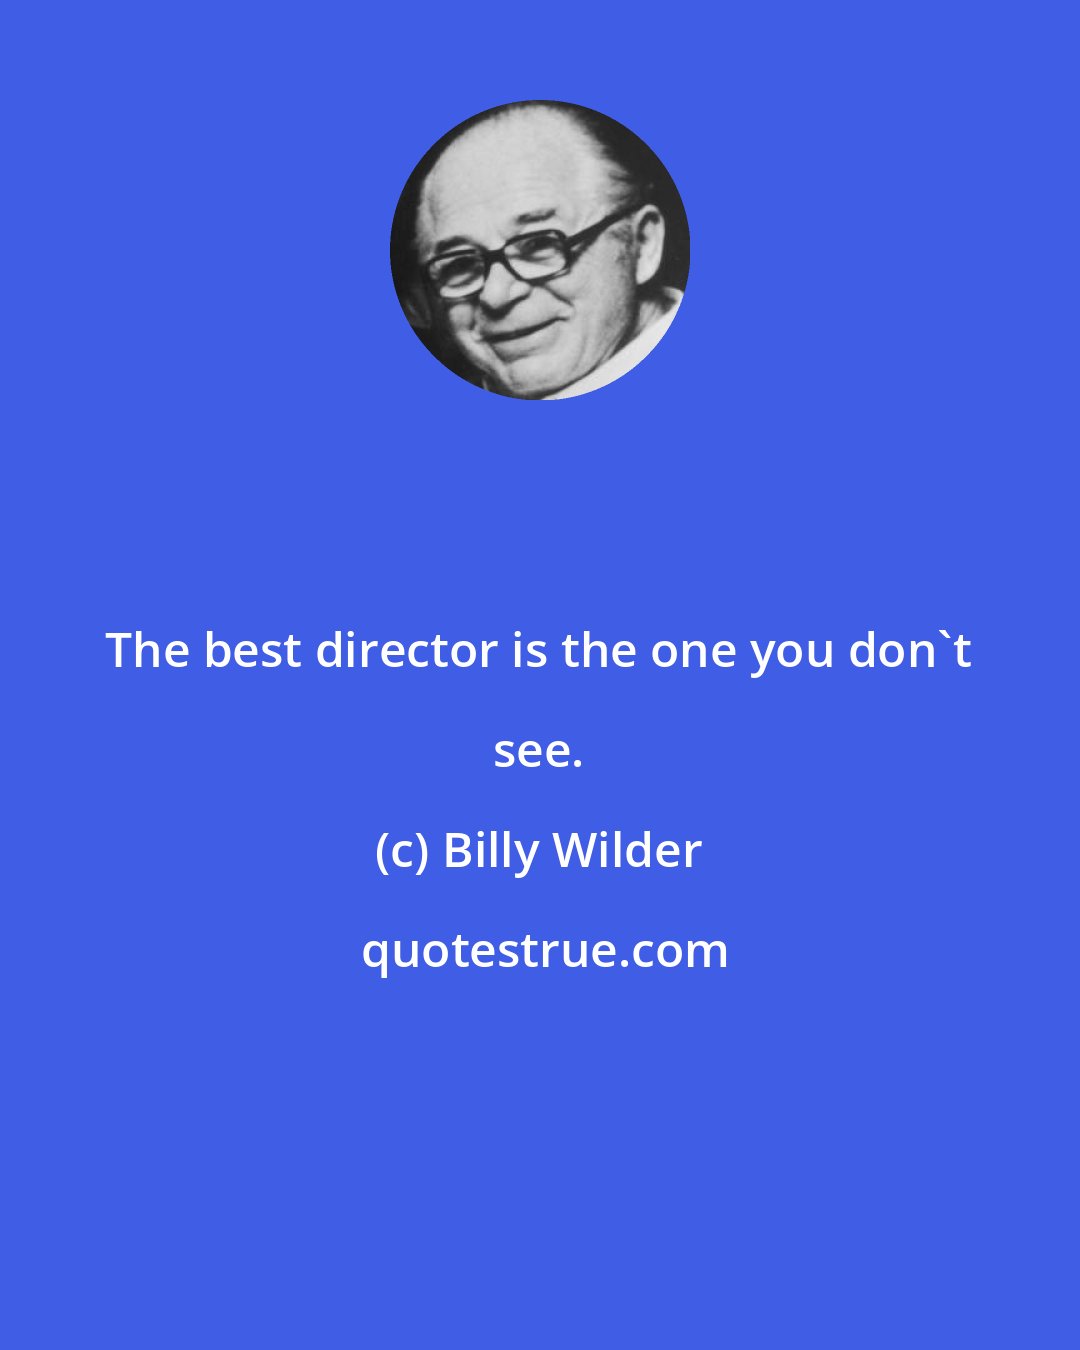 Billy Wilder: The best director is the one you don't see.